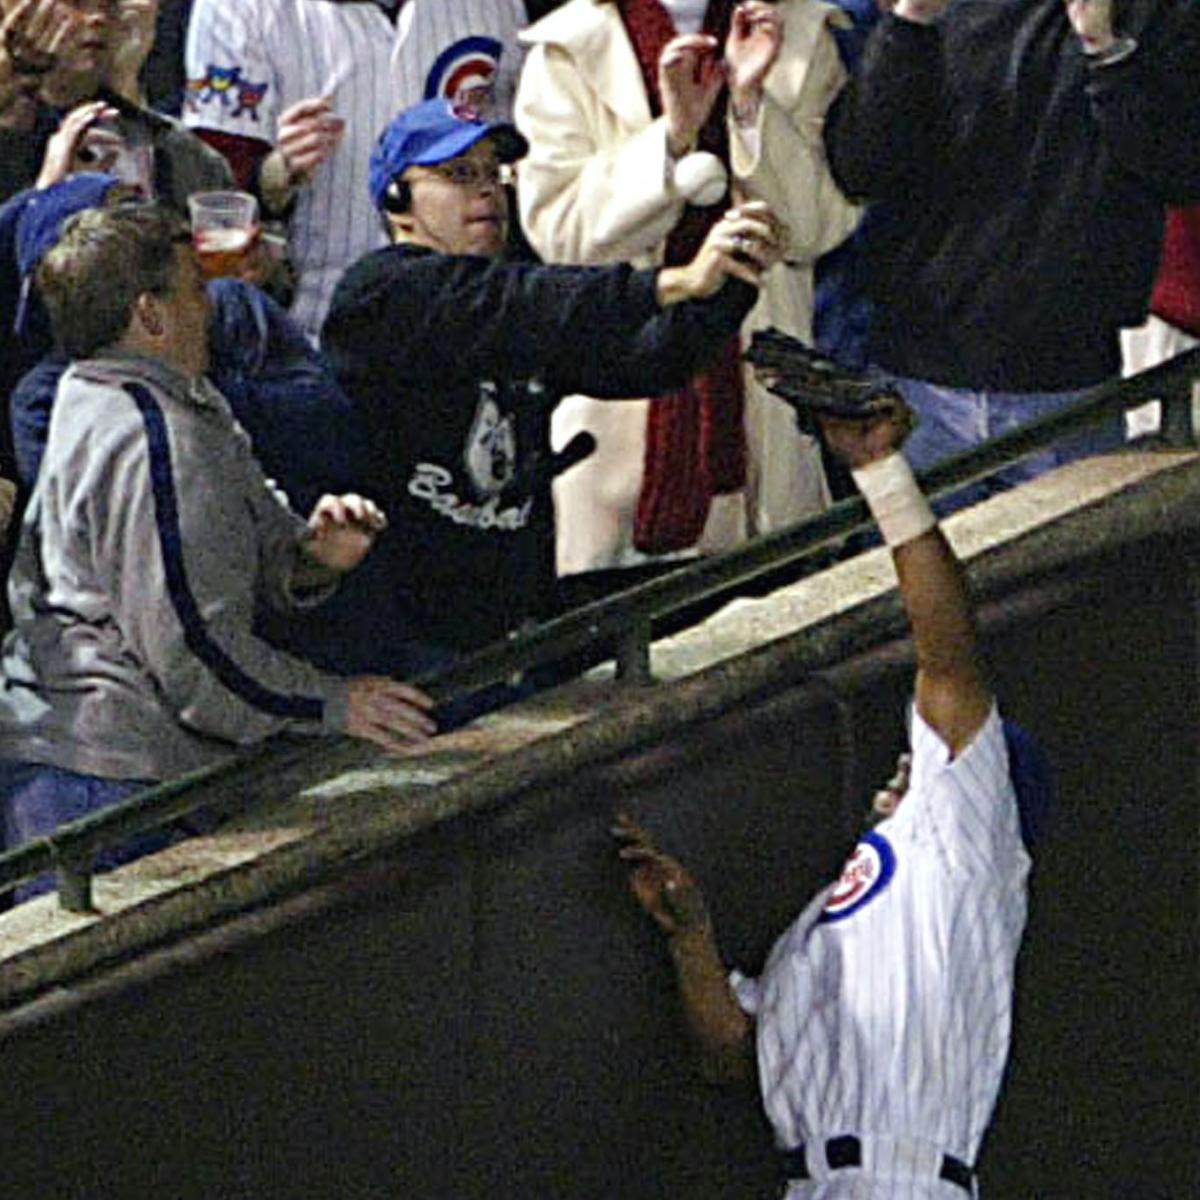 20 years after the Bartman game, Cubs fans can look back with